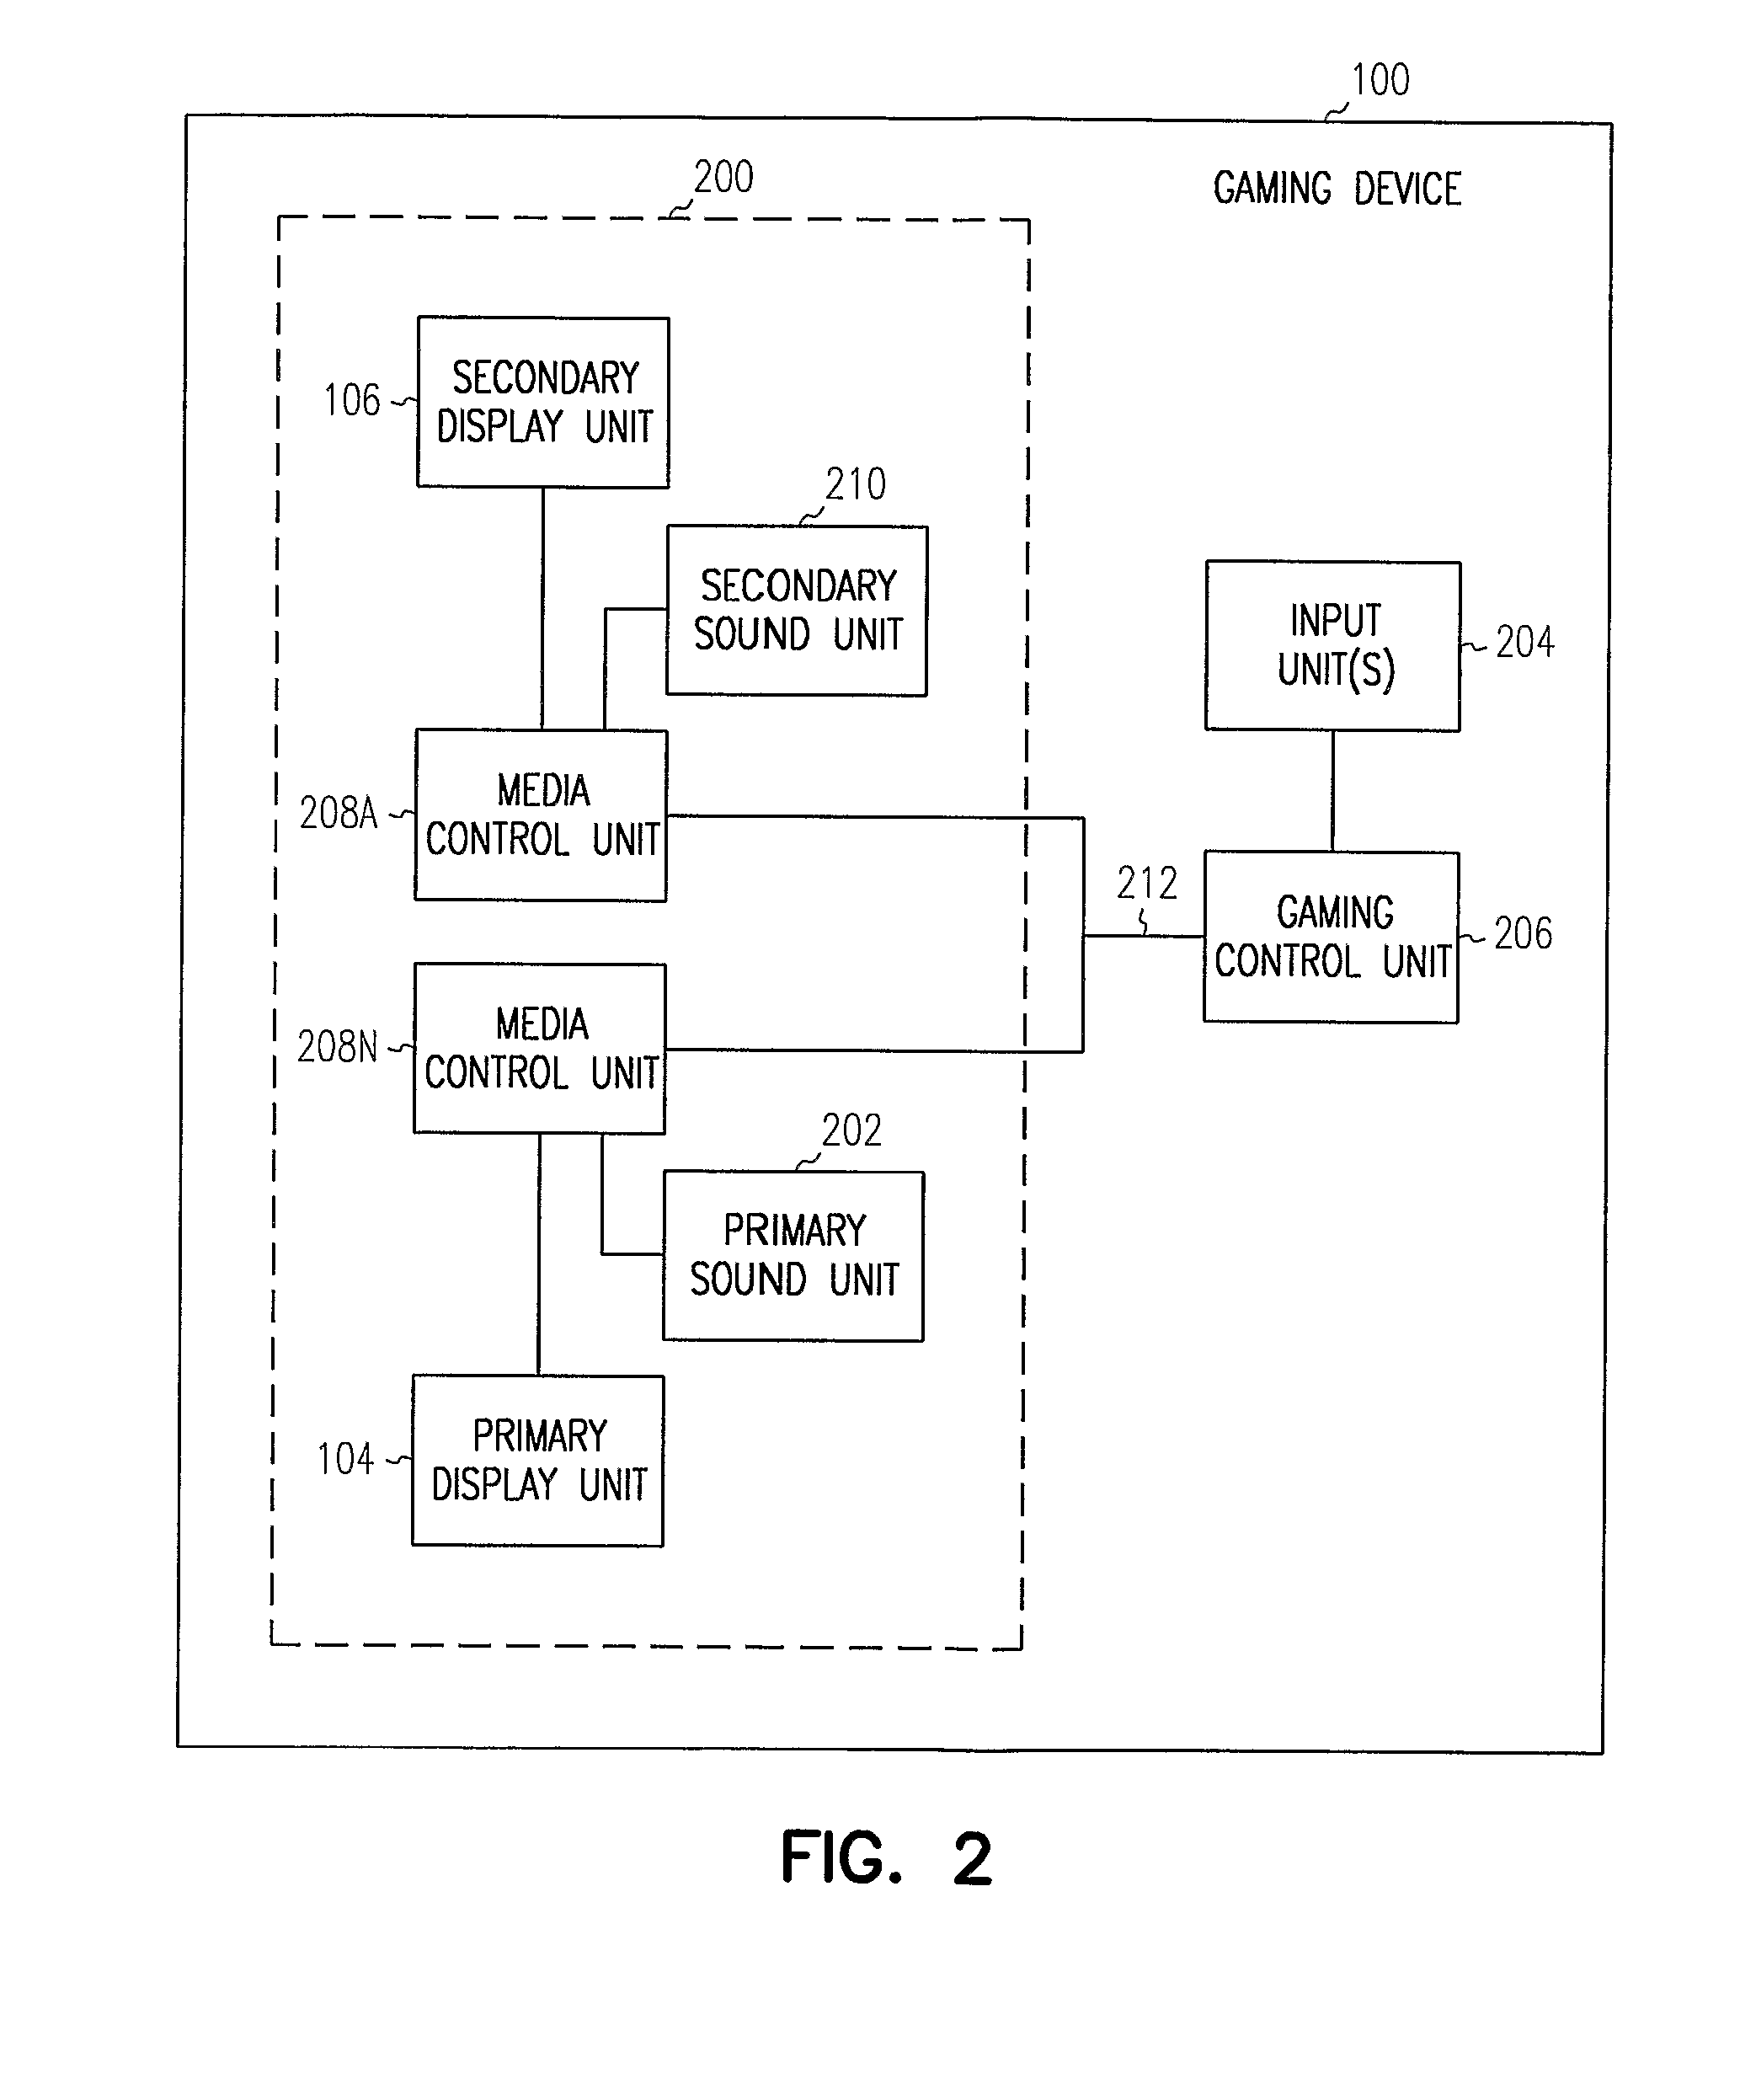 Display For Gaming Device